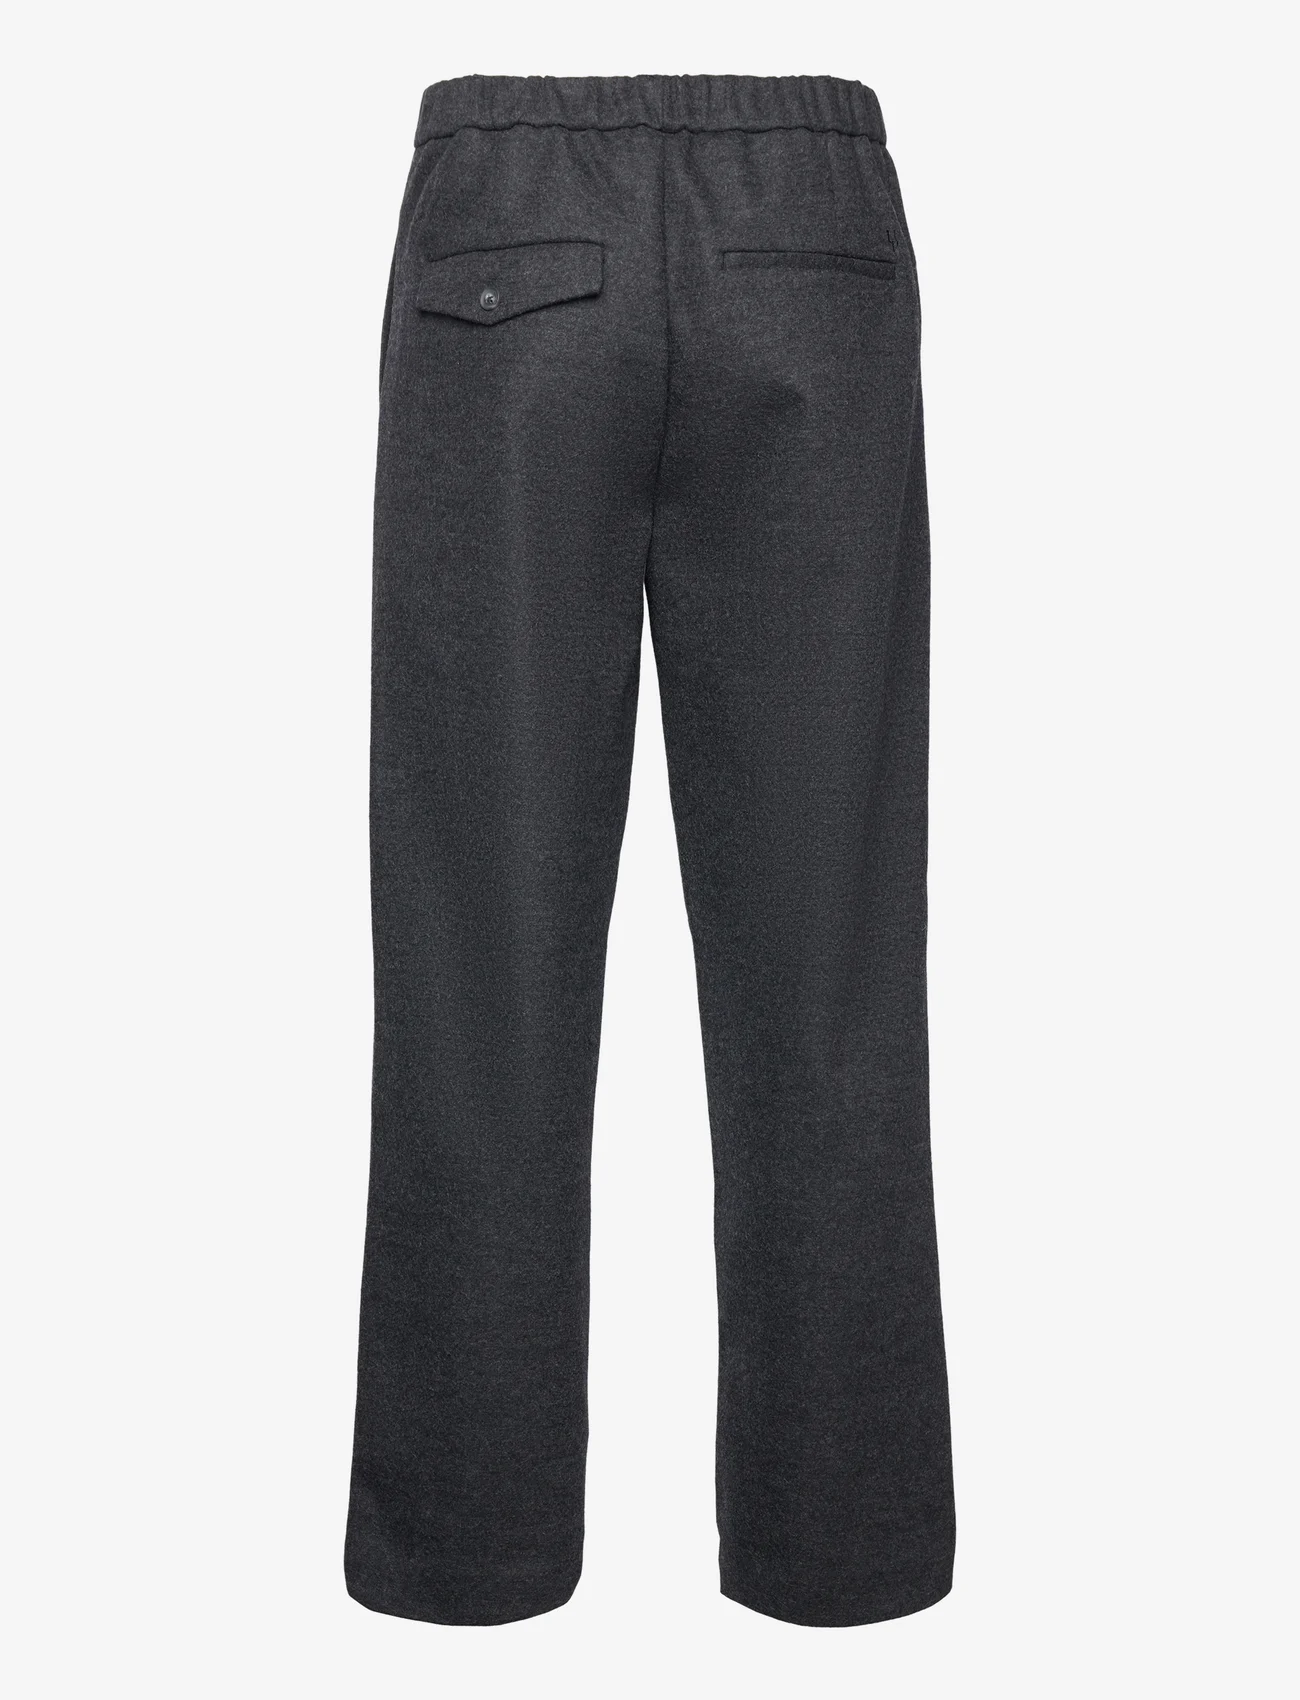 Urban Pioneers - Socrates Pants - chinos - charcoal - 1